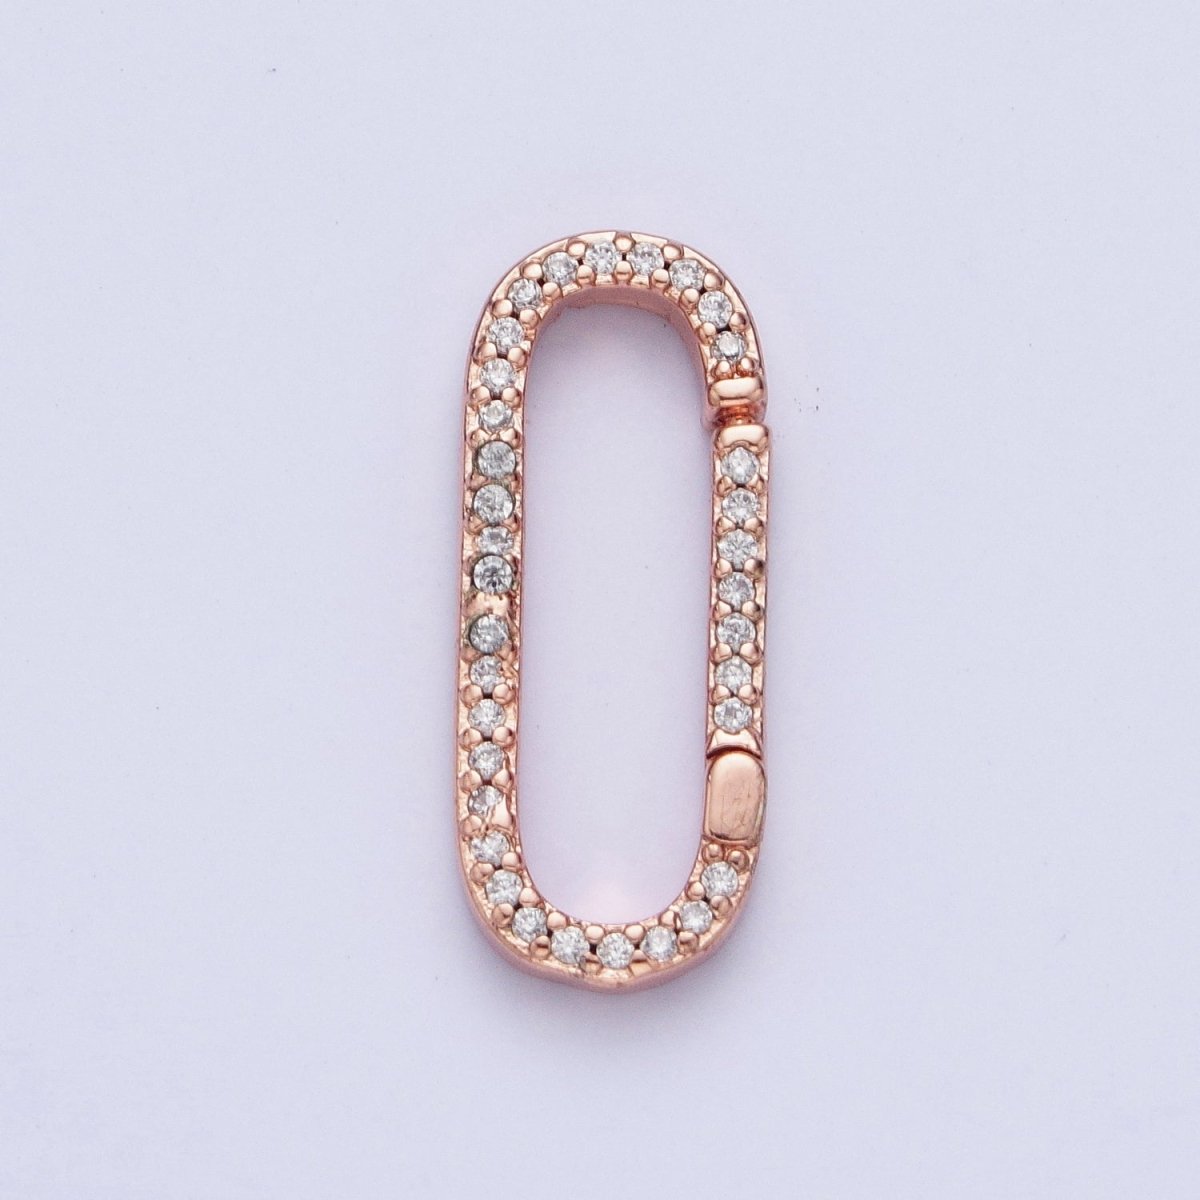 Push Gate Ring Gold Filled Micro Pace CZ Long Oval Spring Gate Clasps For DIY Jewelry Making in Gold, Silver, Rose Gold, Black L-854 L-855 L-856 L-857 - DLUXCA